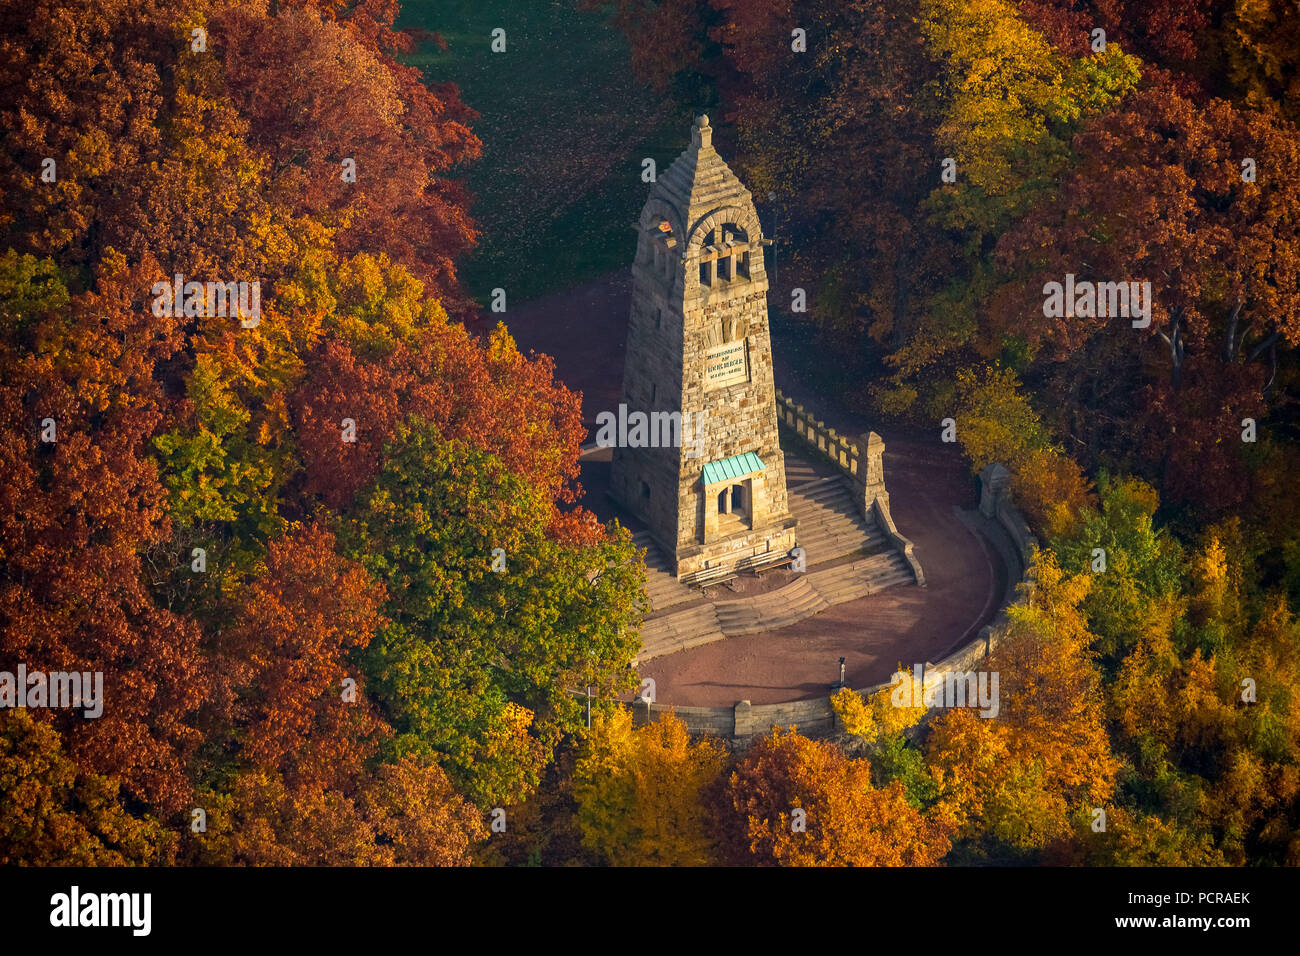 Berger monument in the recreational area Hohenstein, Witten, Ruhr area, North Rhine-Westphalia, Germany Stock Photo